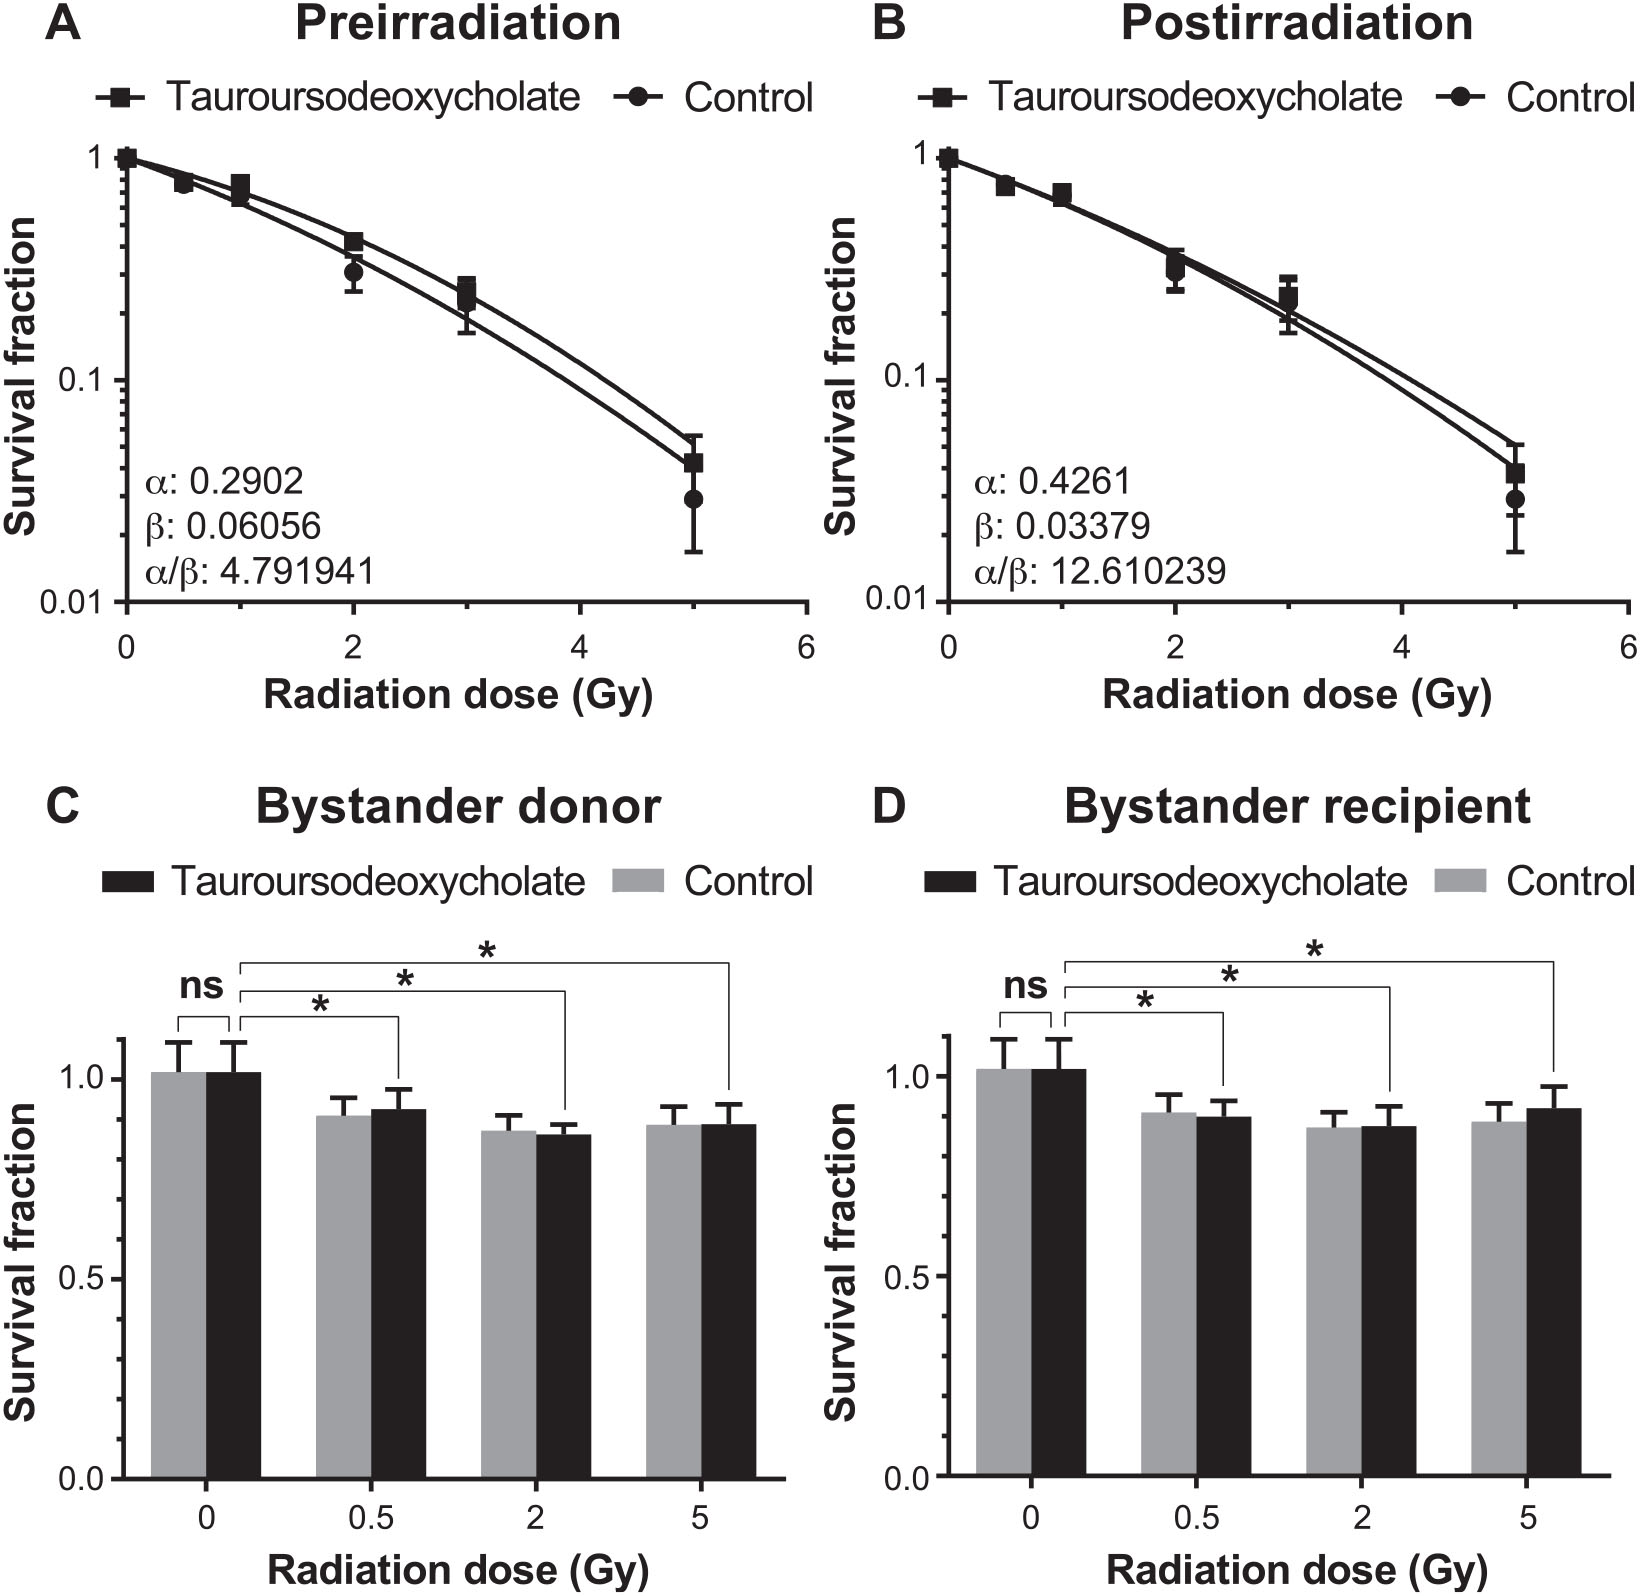 Characterization Of Radioprotective Radiomitigative And Bystander Signaling Modulating Effects Of Endogenous Metabolites Phenylacetate Ursodeoxycholate And Tauroursodeoxycholate On Hct116 Human Colon Carcinoma Cell Line